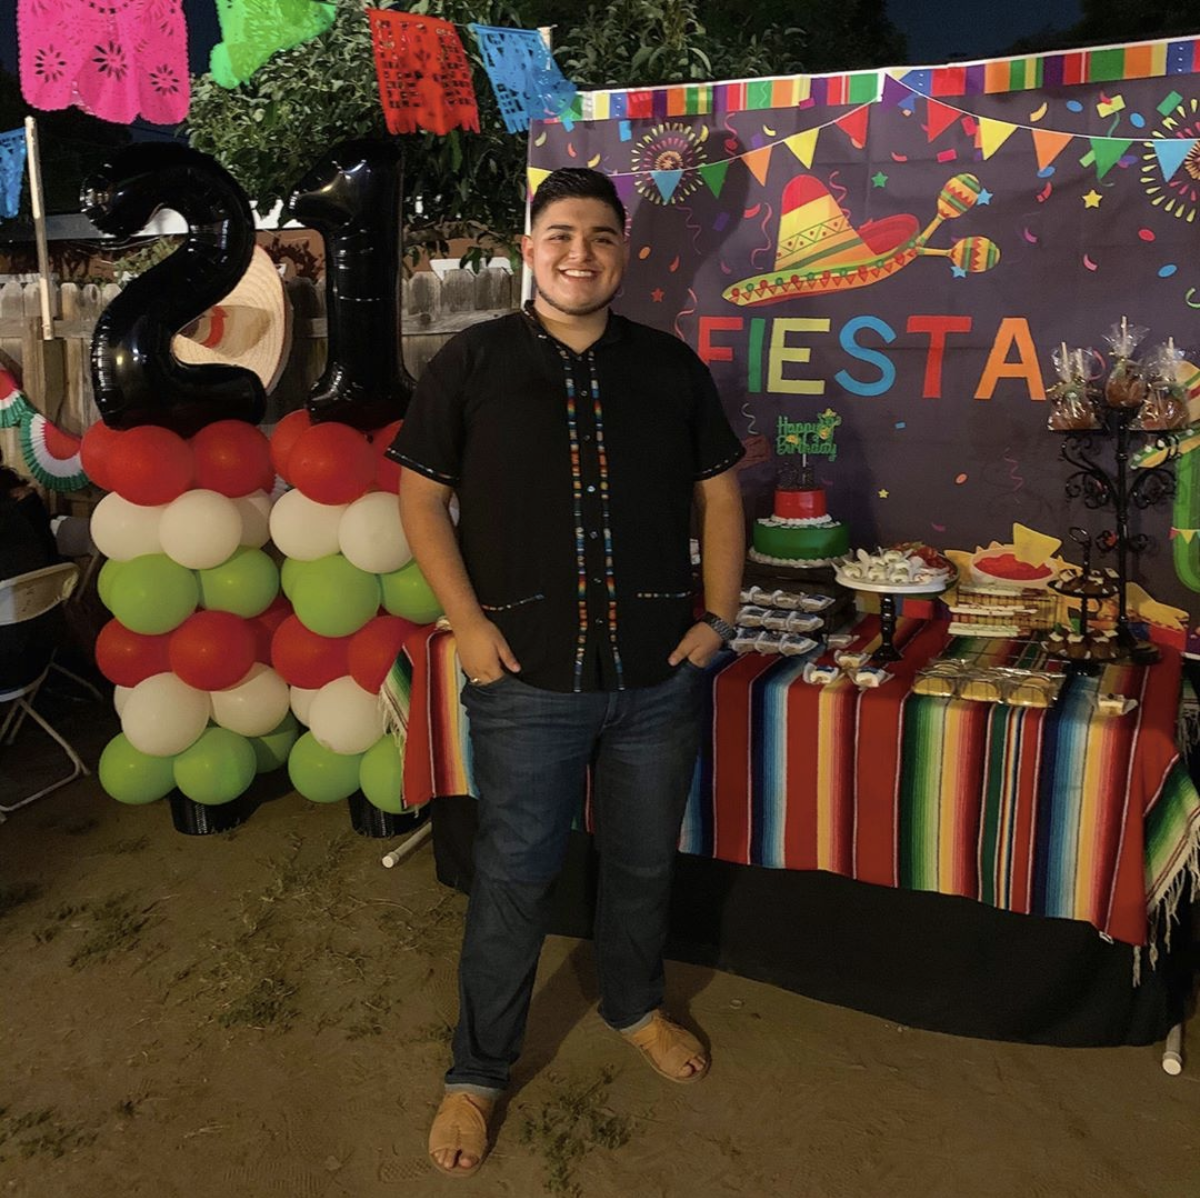 Pablo Tiznado is a fourth-year from Anaheim, CA majoring in Spanish and Political Science with an option in Legal Studies. He is being highlighted for Hispanic Heritage Month.